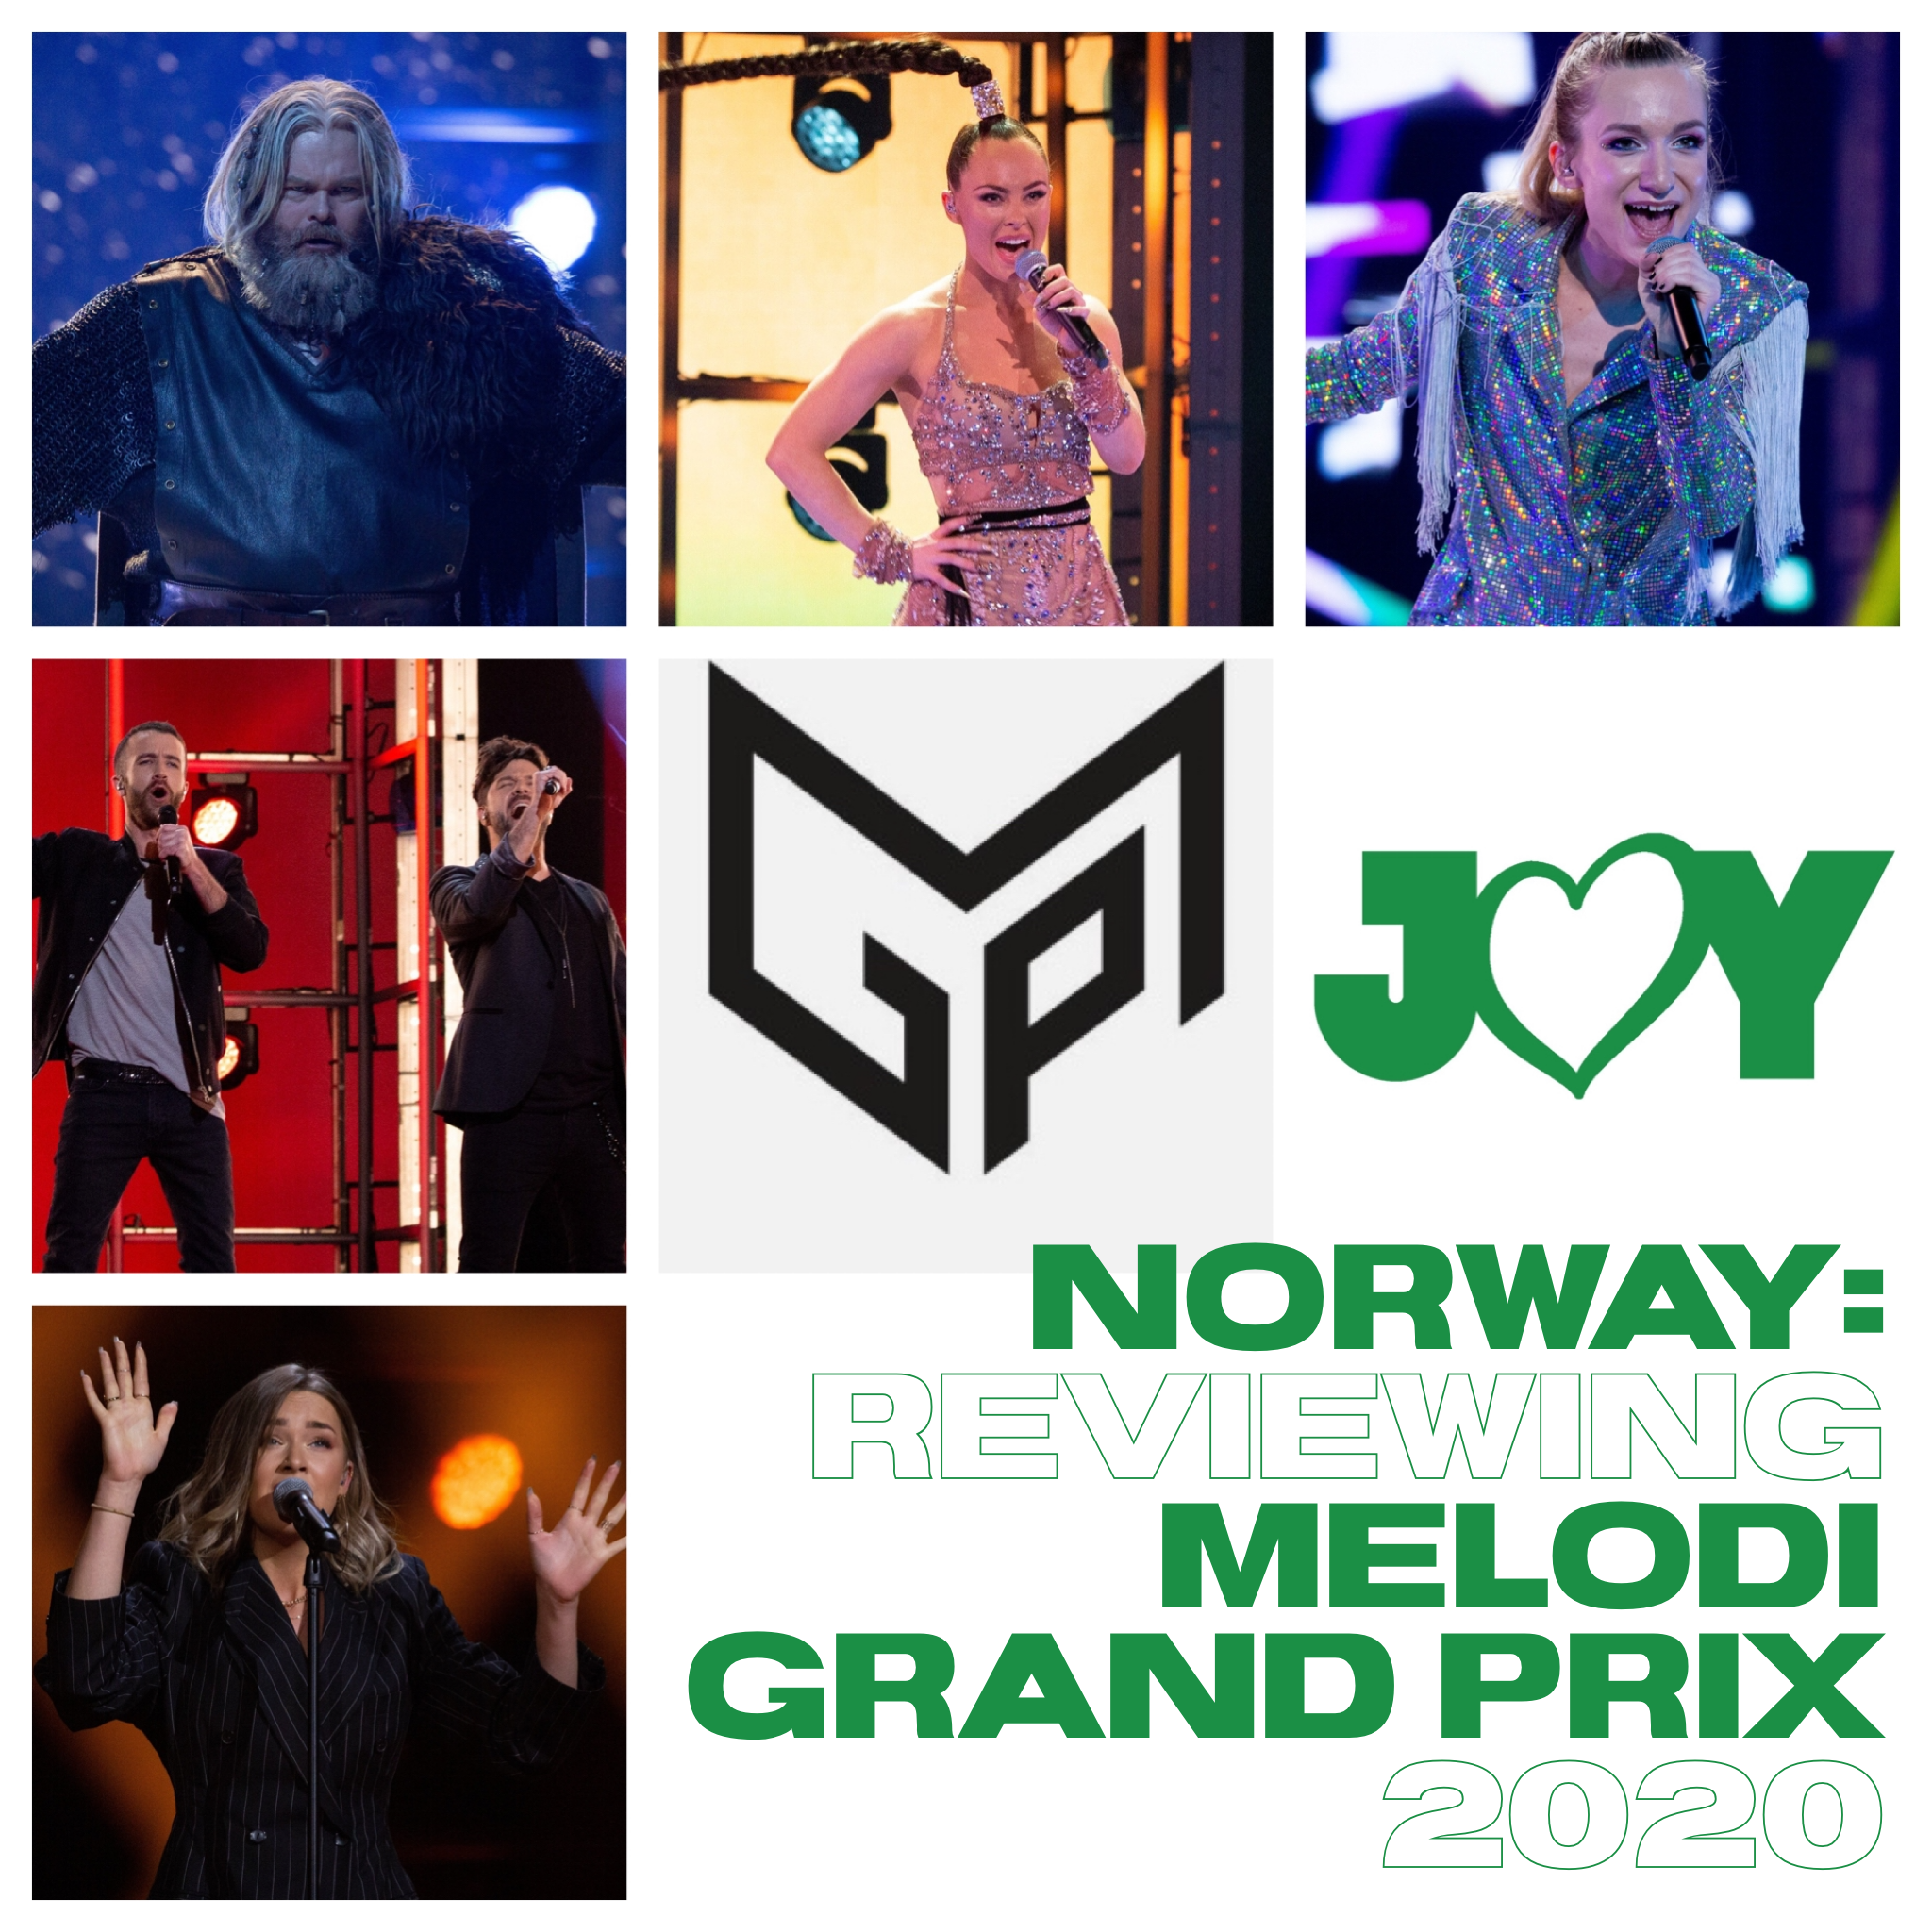 Holding Norway’s attention: Reviewing Melodi Grand Prix 2020